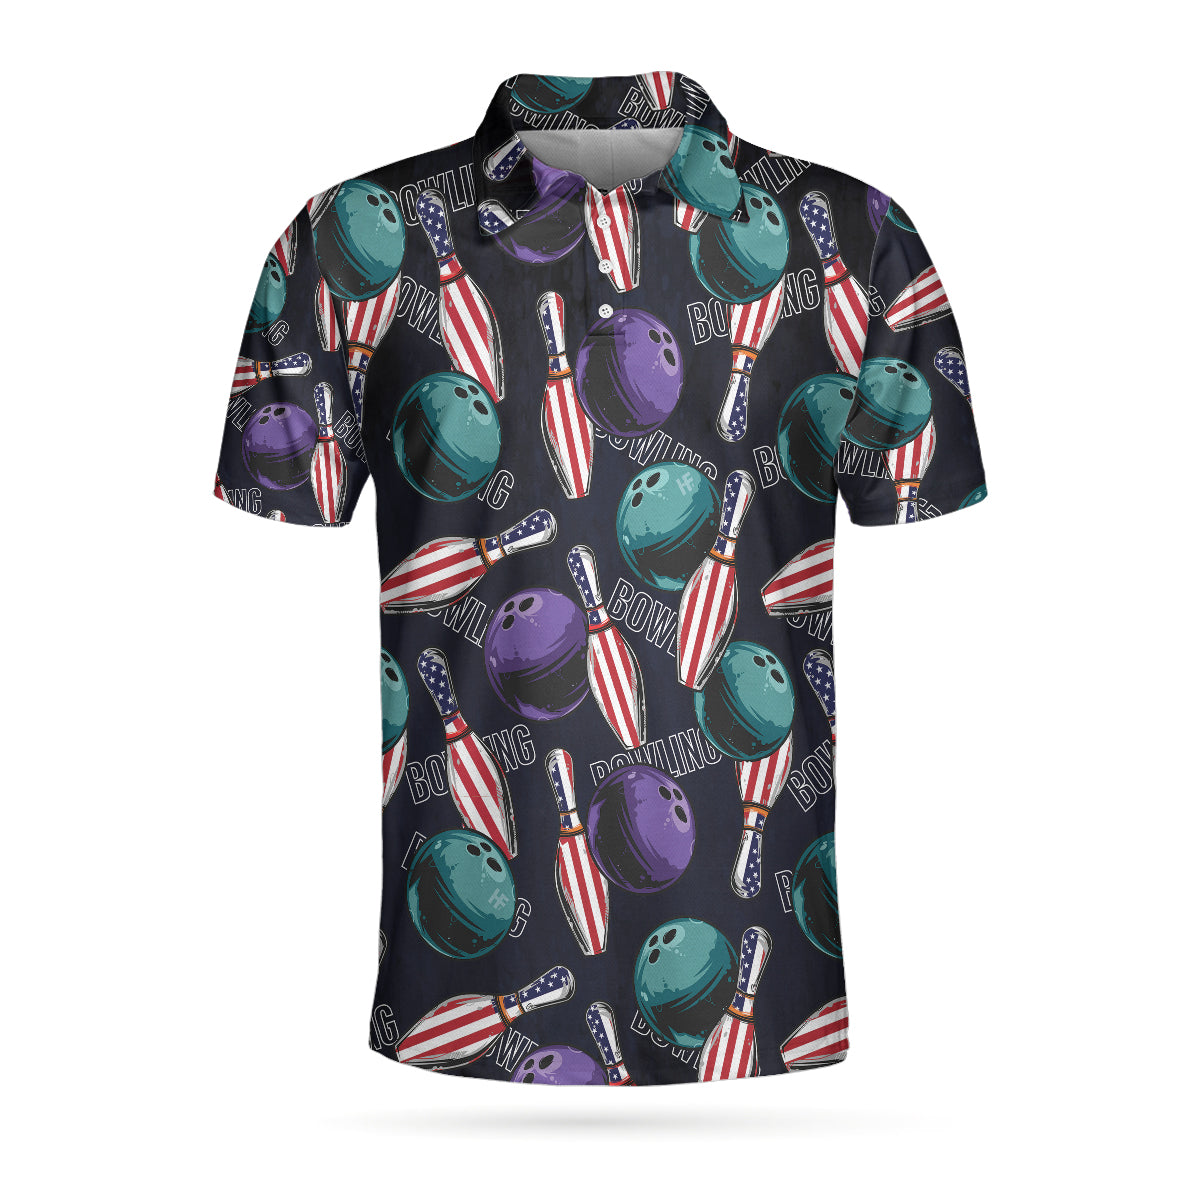 Bowling Is My Life Polo Shirt/ American Flag Pattern Bowling Shirt For Men Coolspod